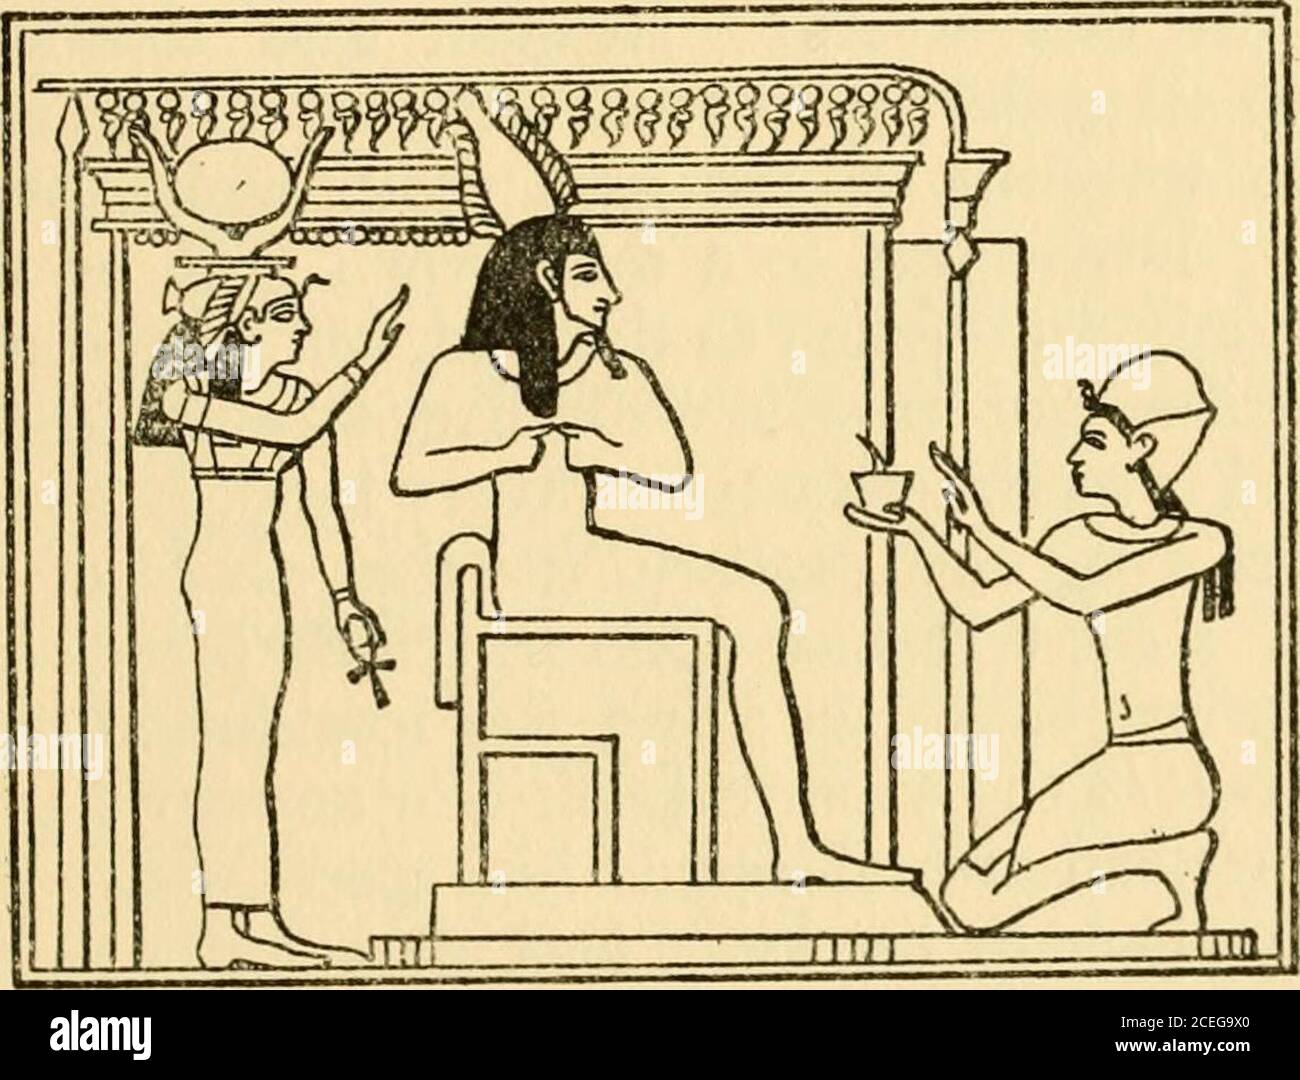 . Osiris and the Egyptian resurrection;. Seti I offering incense to Osiris, behind whom stands Anubis.Mariette, Abydos, Vol. I, p. 17-. Seti I offering incense to Osiris in his shrine.Mariette, Abydos, Vol. I, p. 38. bestow his friendship and protection on him. Thepraises which were heaped upon the god by hisworshippers were supposed to please him and to causebenevolence towards them to arise in him, and theincense, sweet-smelling unguents, and fine apparel werebelieved to gratify feelings, the character of which theyVOL. I. ^ 258 Osiris and the Egyptian Resurrection did not enquire into too c Stock Photo